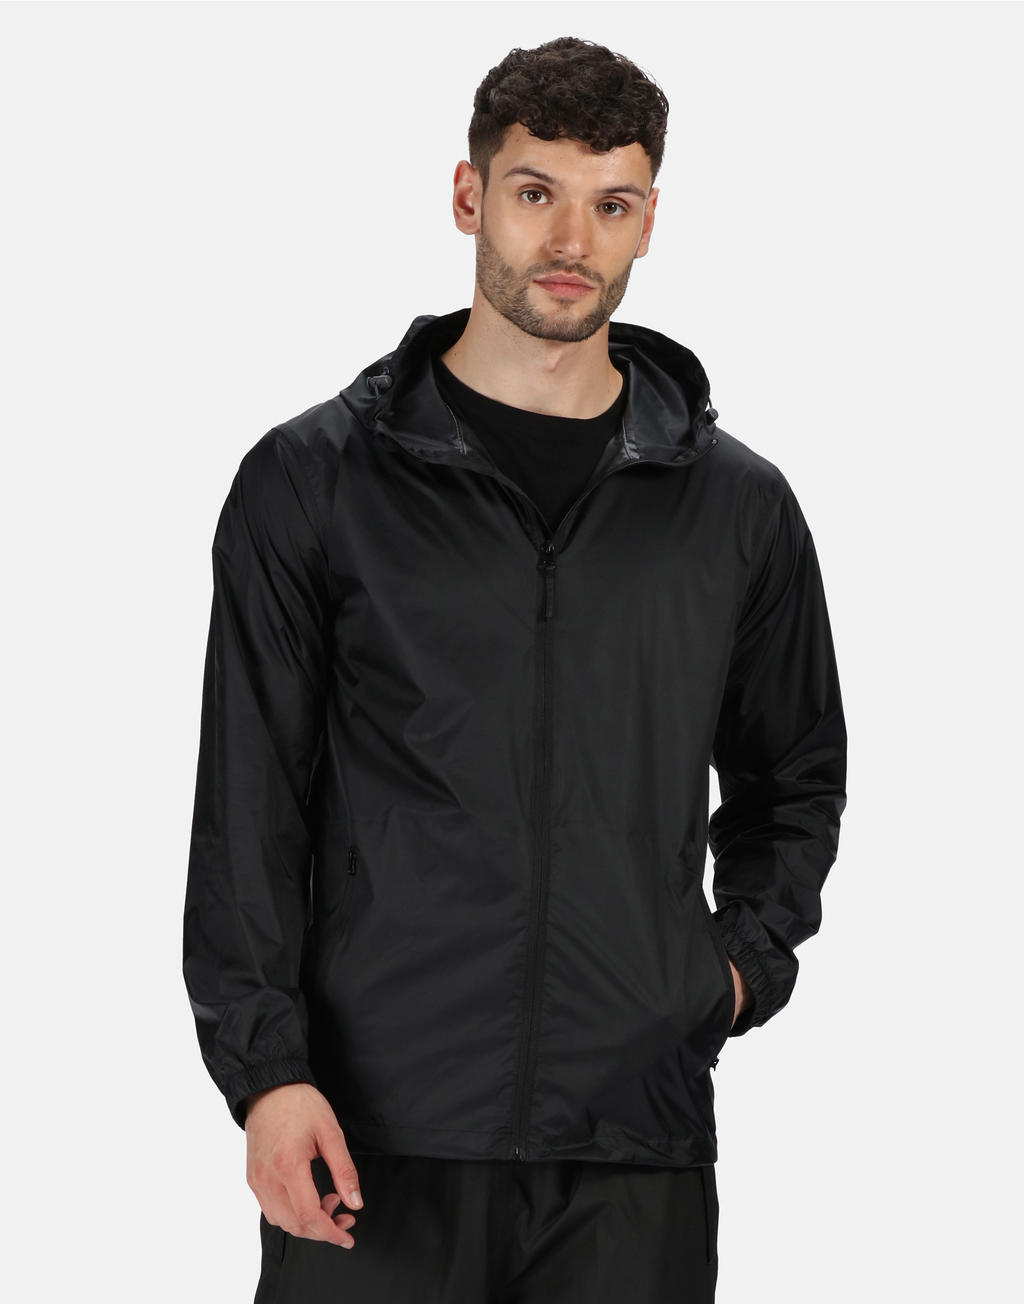  Pro Pack Away Jacket in Farbe Black